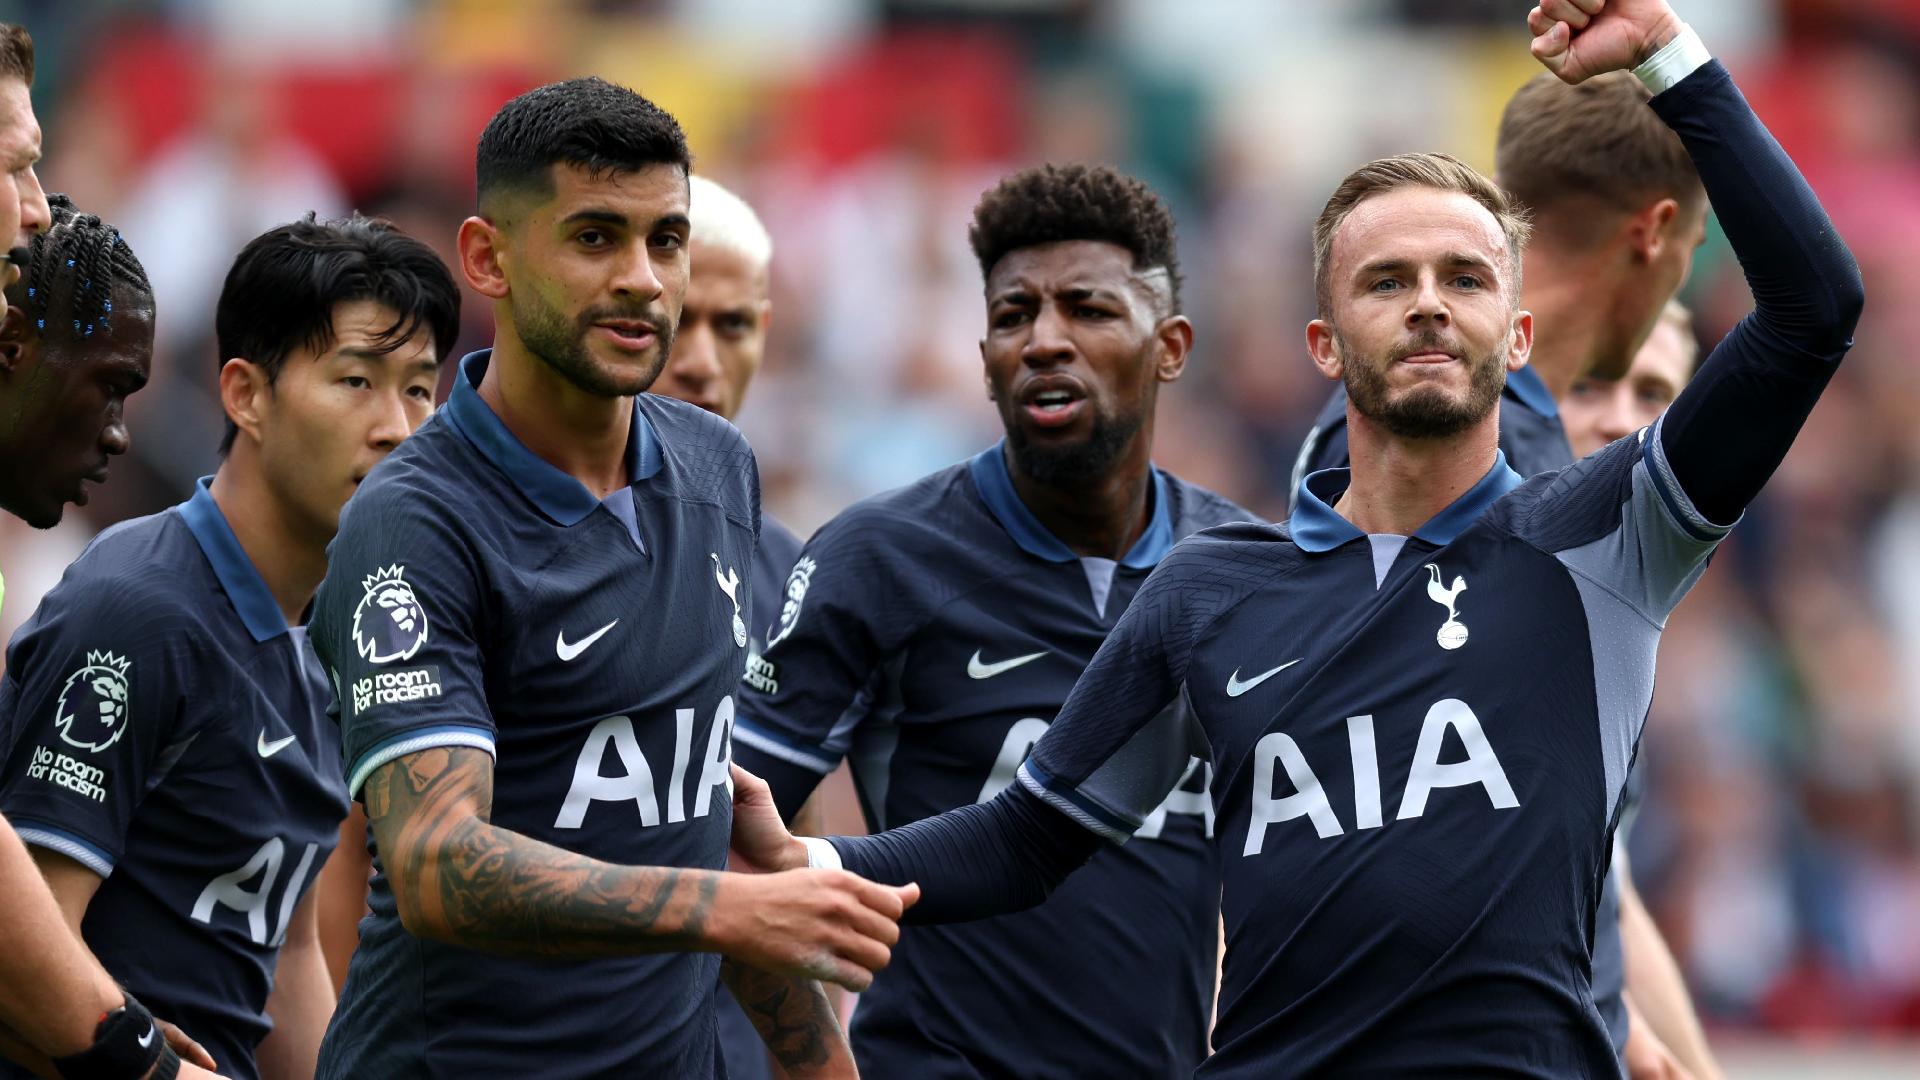 Which Players Have Played for Both World Cup team and Tottenham